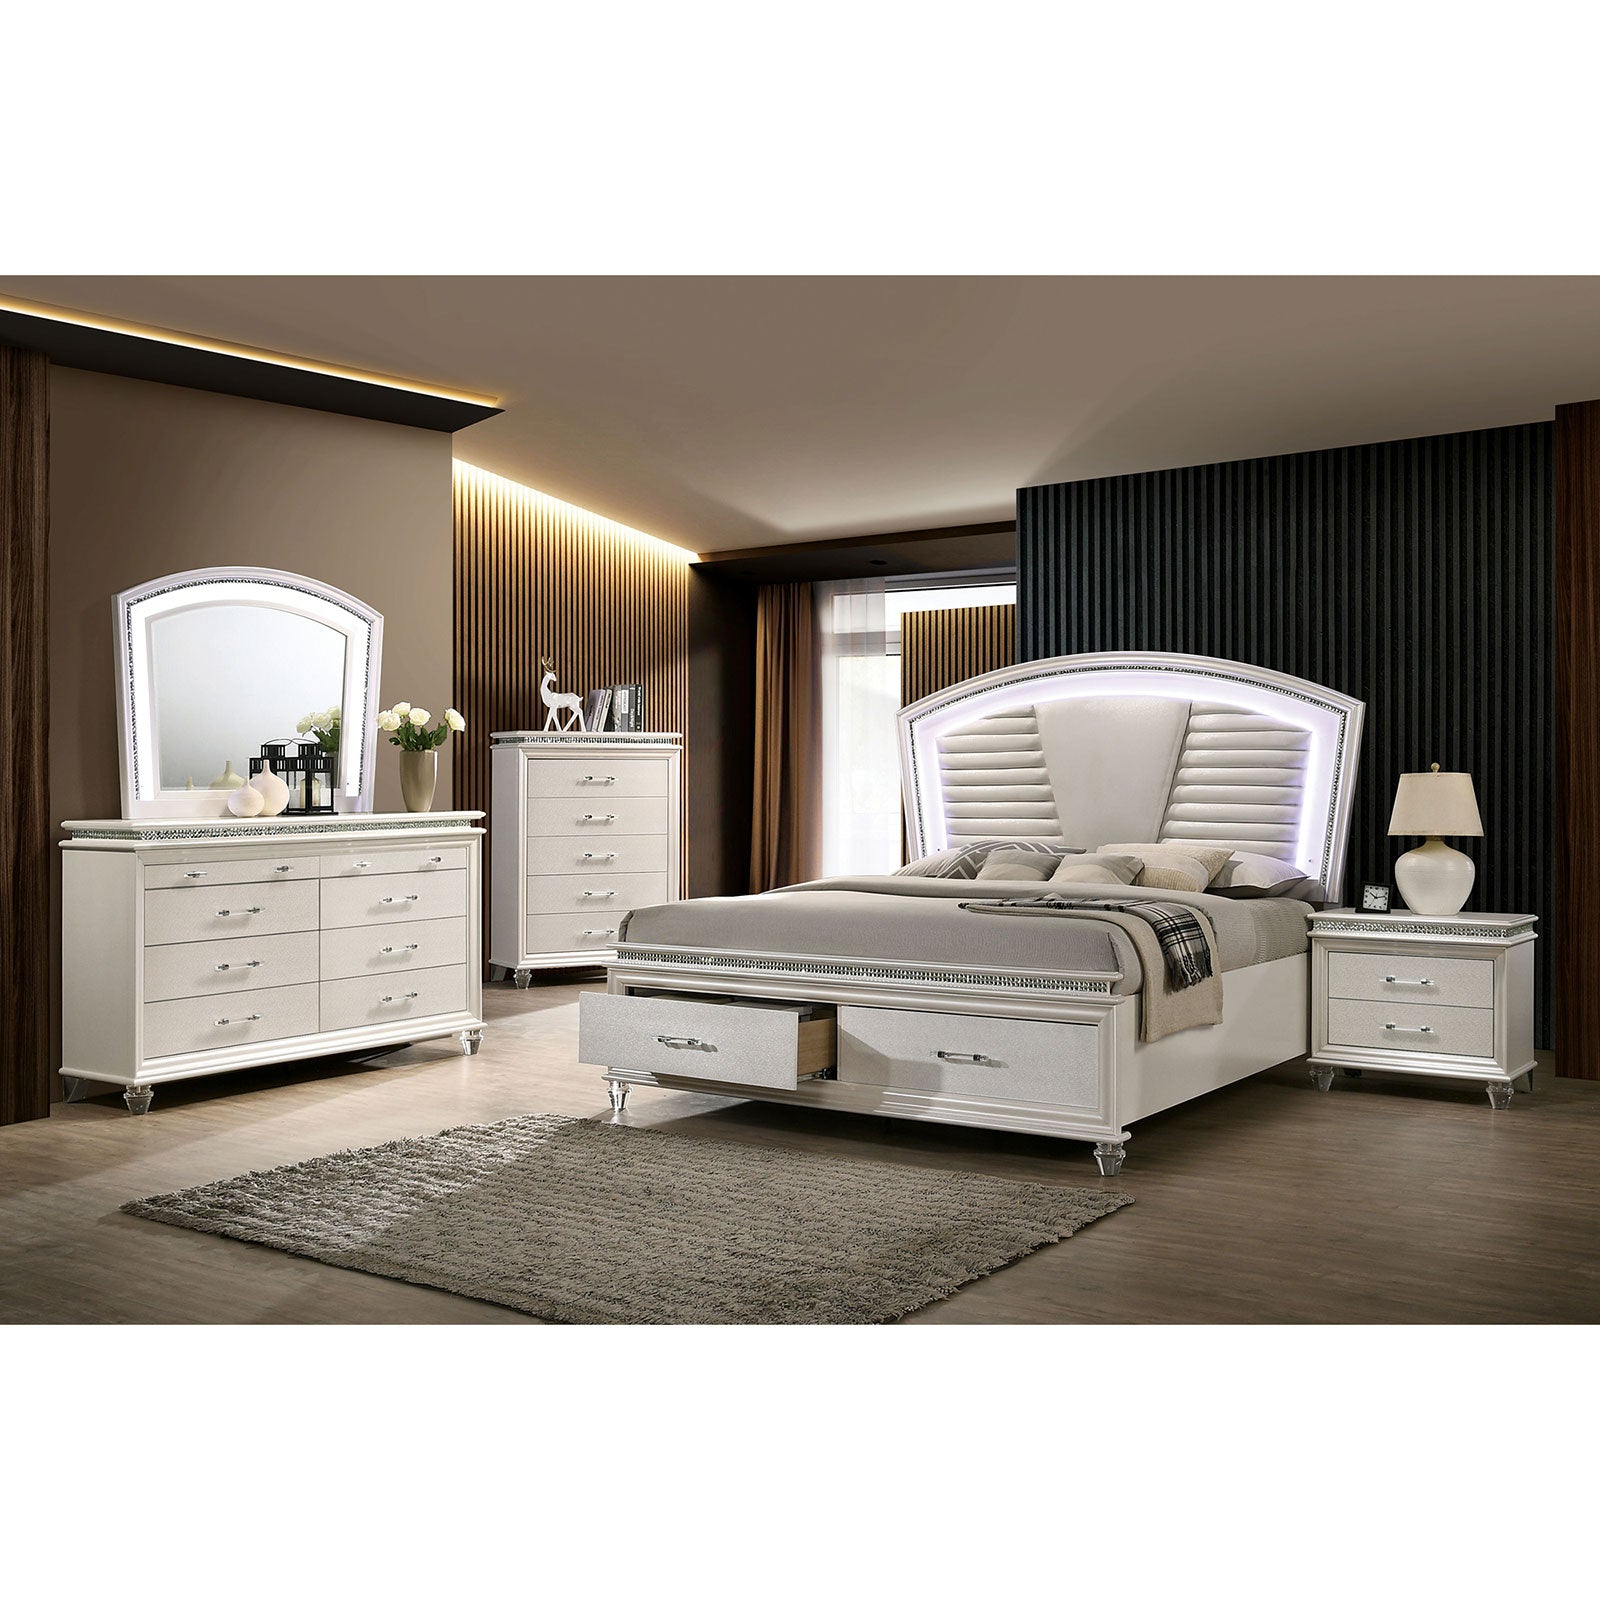 MADDIE 5 Pc. Queen Bedroom Set w/ Chest image